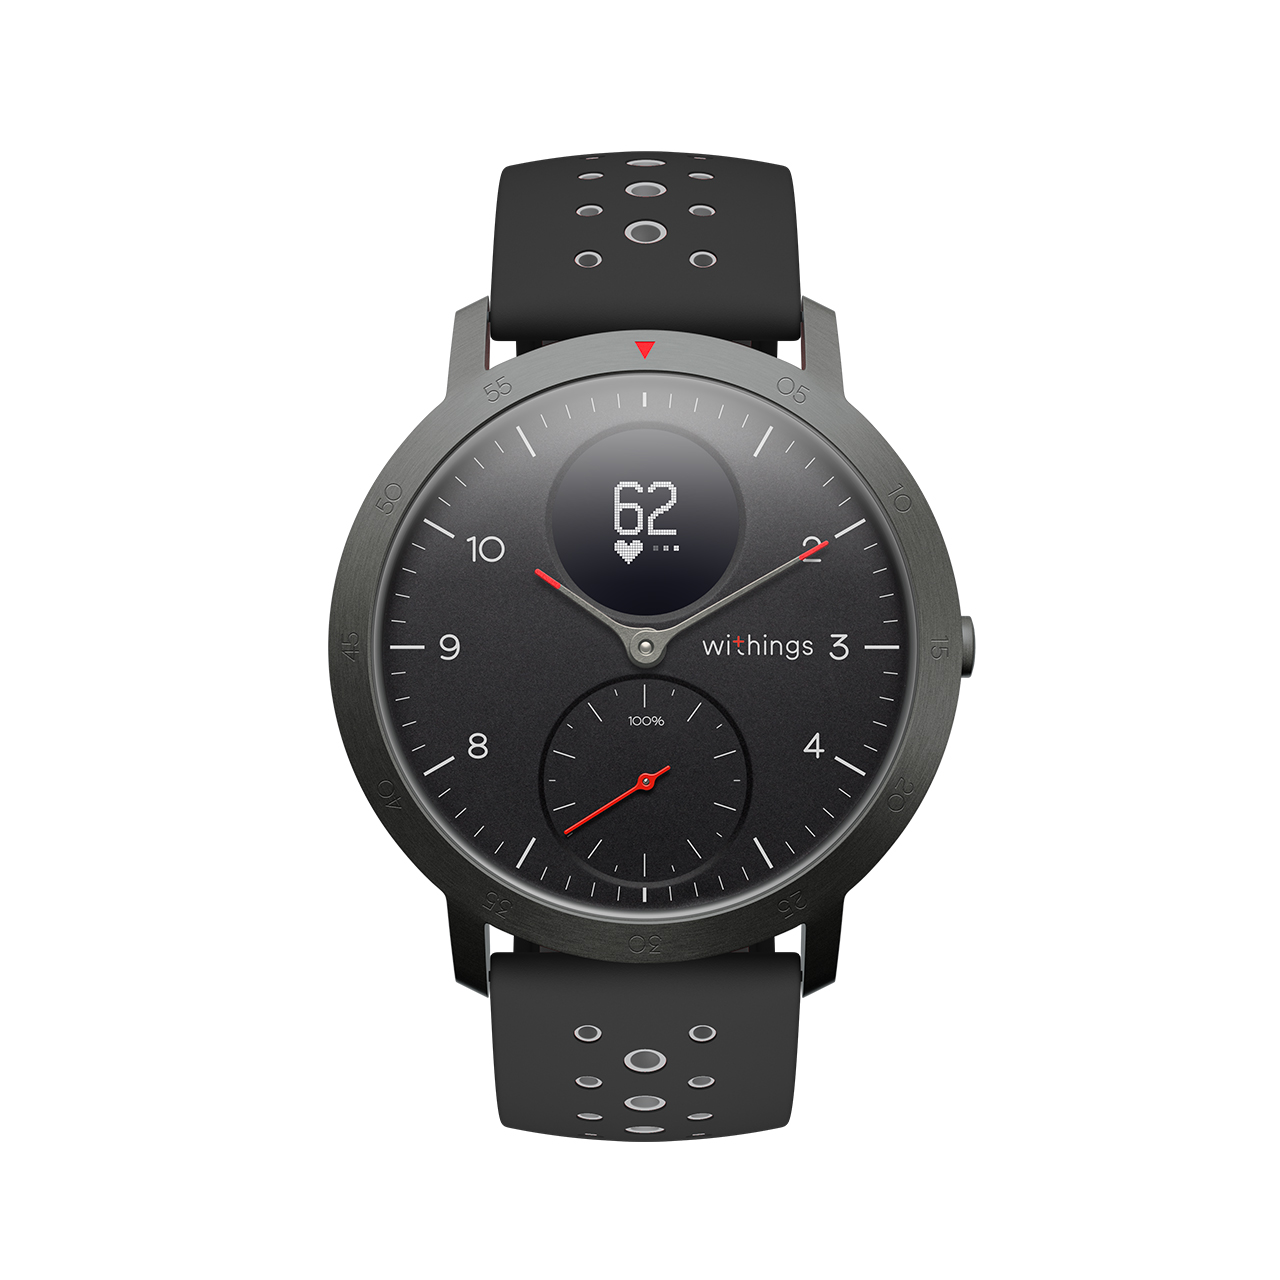 Withings Steel HR Sport, Black - Multisport Hybrid Smartwatch - Heart rate tracking, Connected GPS, Notifications - Withings Official Store